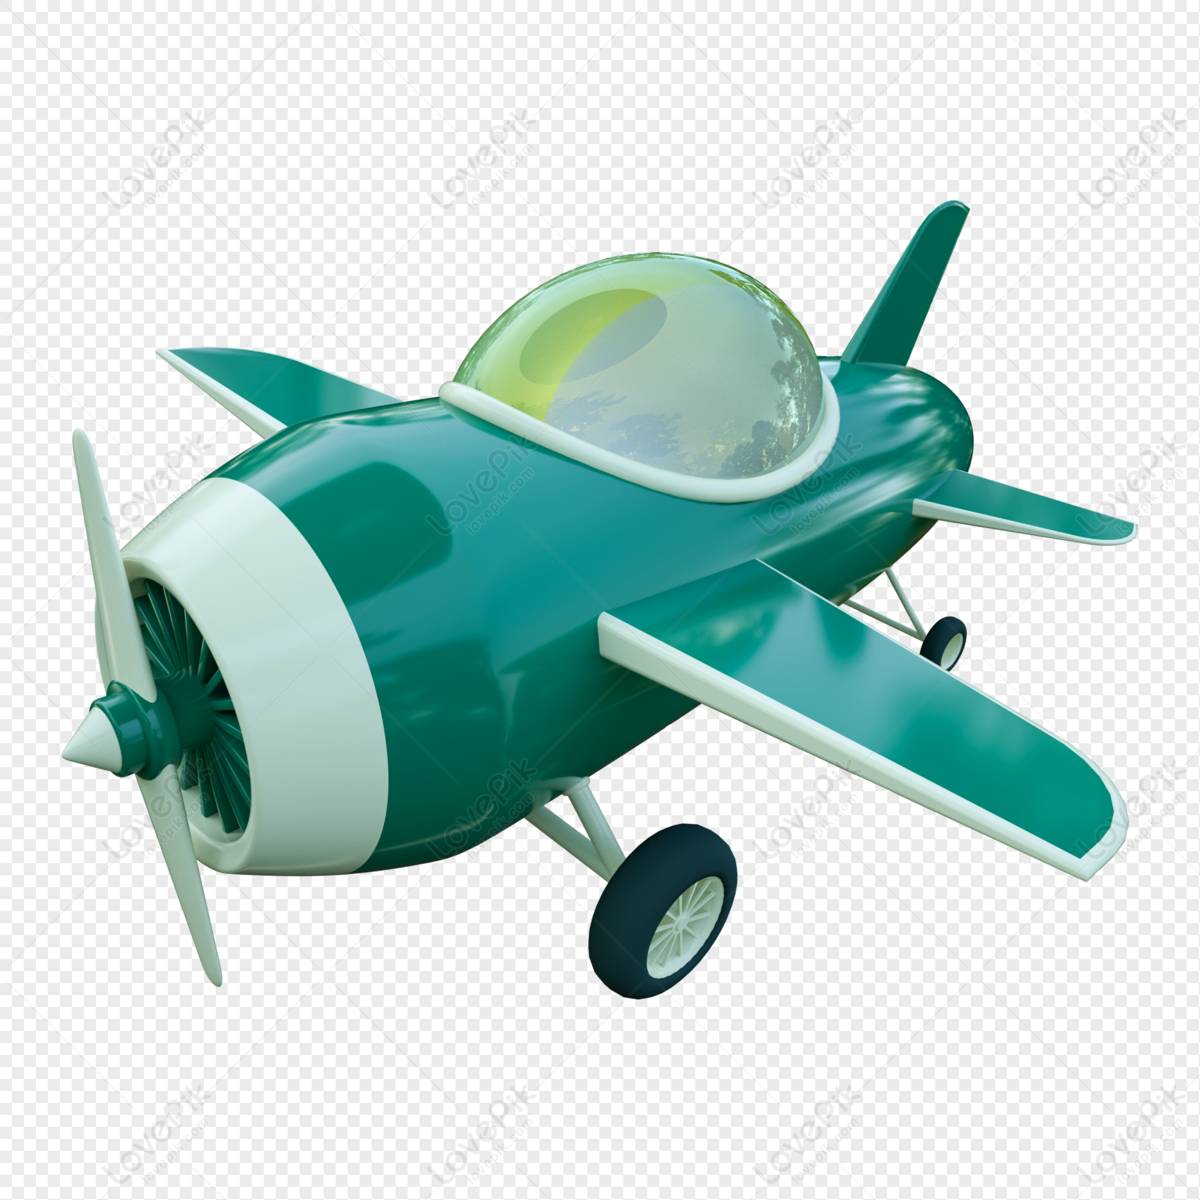 Small Plane PNG Picture And Clipart Image For Free Download - Lovepik |  401186435